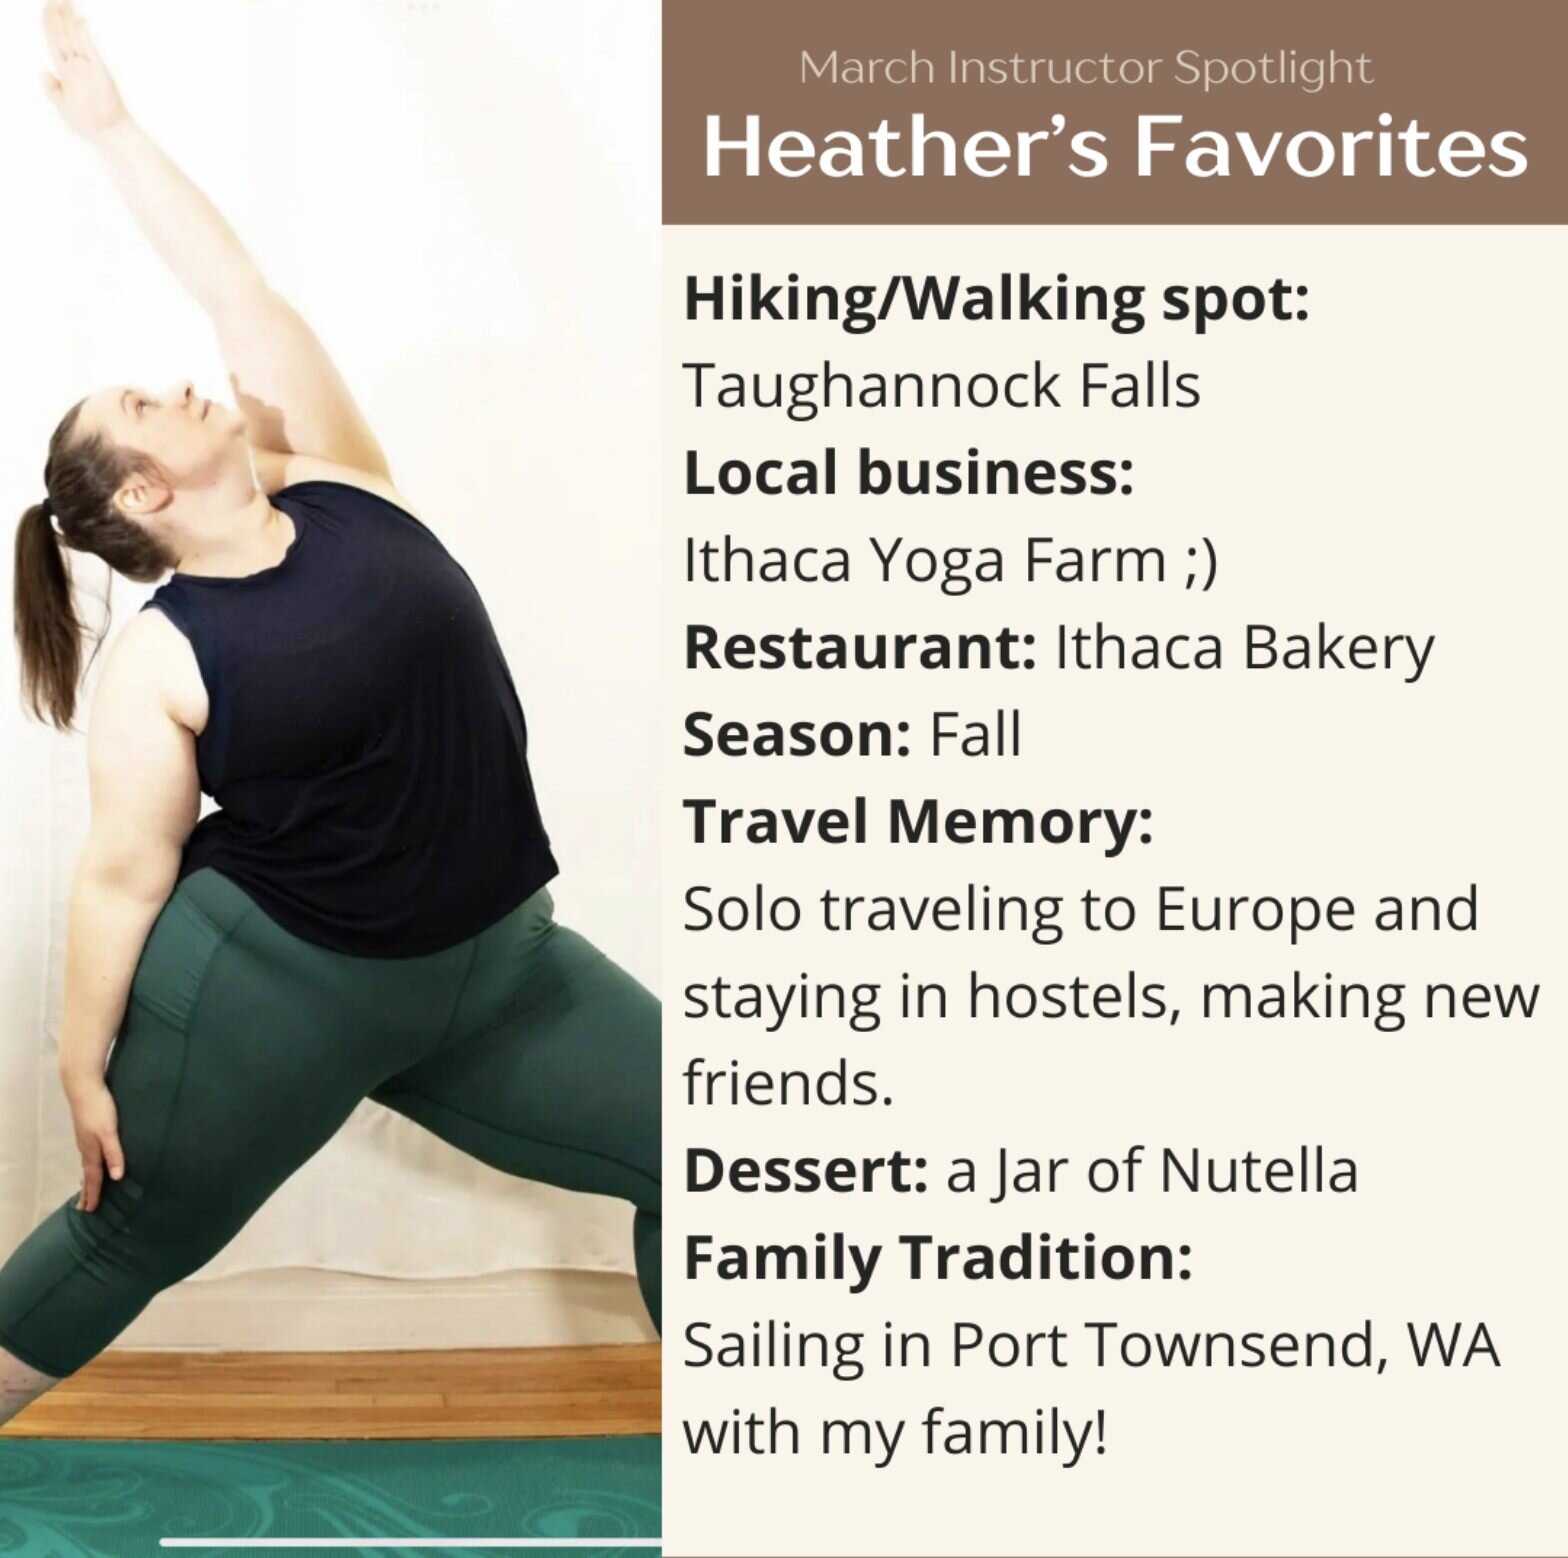 📣 Learn a little more about Heather, our March Teacher Spotlight! 🌟

🌿Join her every Monday and Tuesday at the Studio for class! 🌿

Monday : Gentle Hatha
https://get.mndbdy.ly/OdJjDUVx4Hb

Tuesday : Chakra Yoga
https://get.mndbdy.ly/68ZDhZWx4Hb